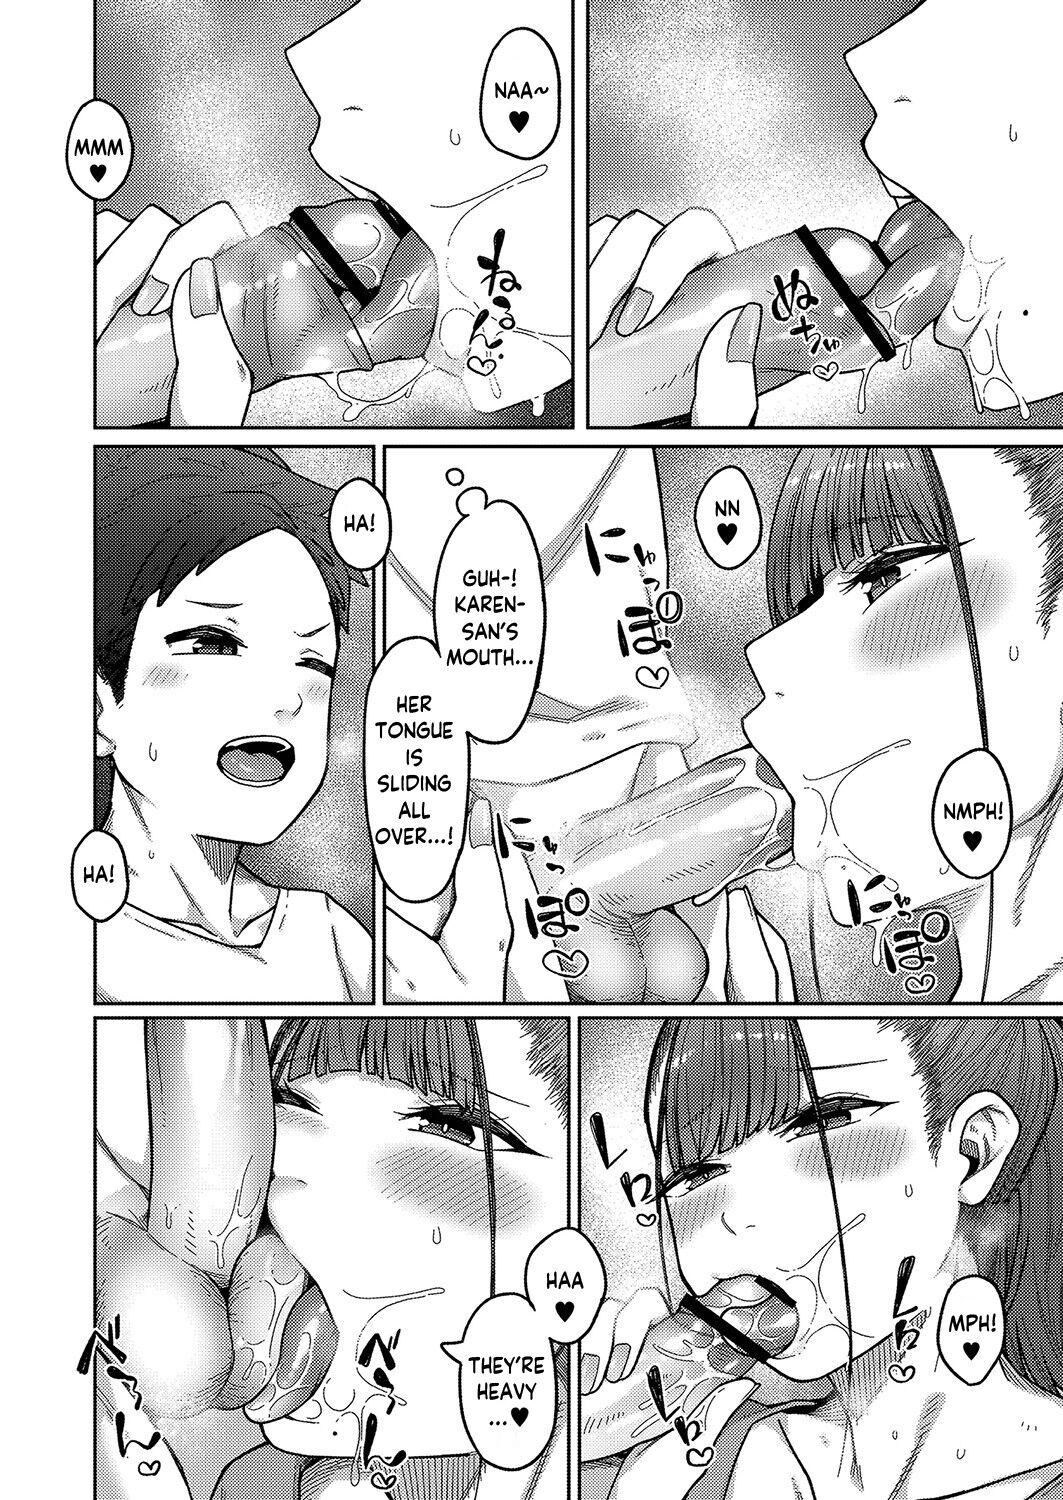 Speculum [Tsukuha] Together with Onee-san! | Onee-san to Issho! (COMIC Reboot Vol.30) [English] [Yxplore] [Digital] Head - Page 6